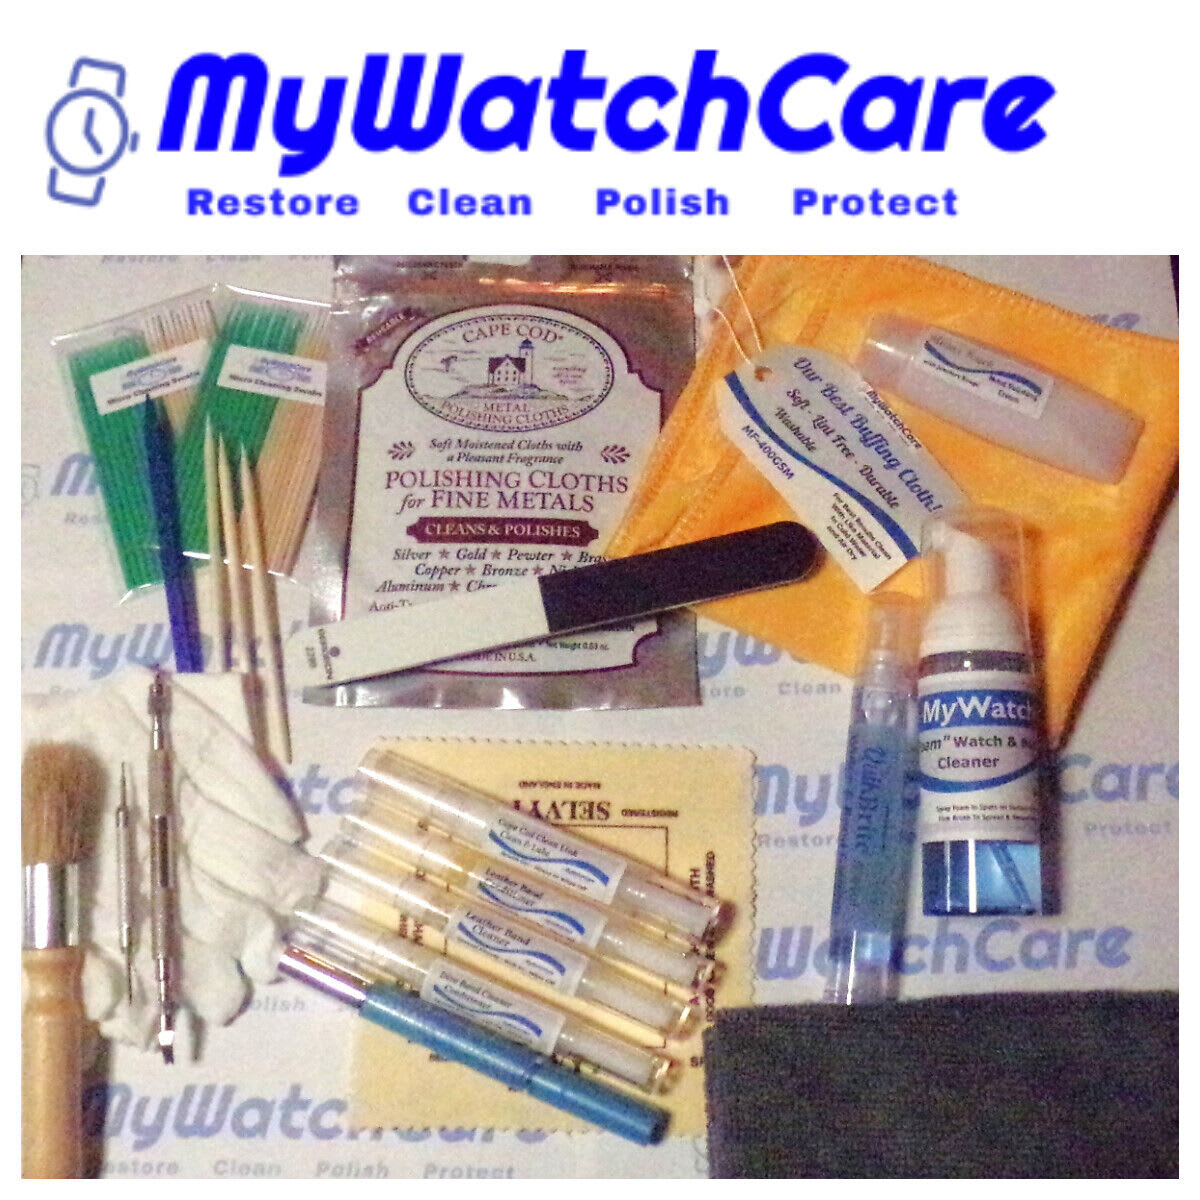 Omega Watch Care Kit - Pro Restore, Clean & Polish - My Watch Care